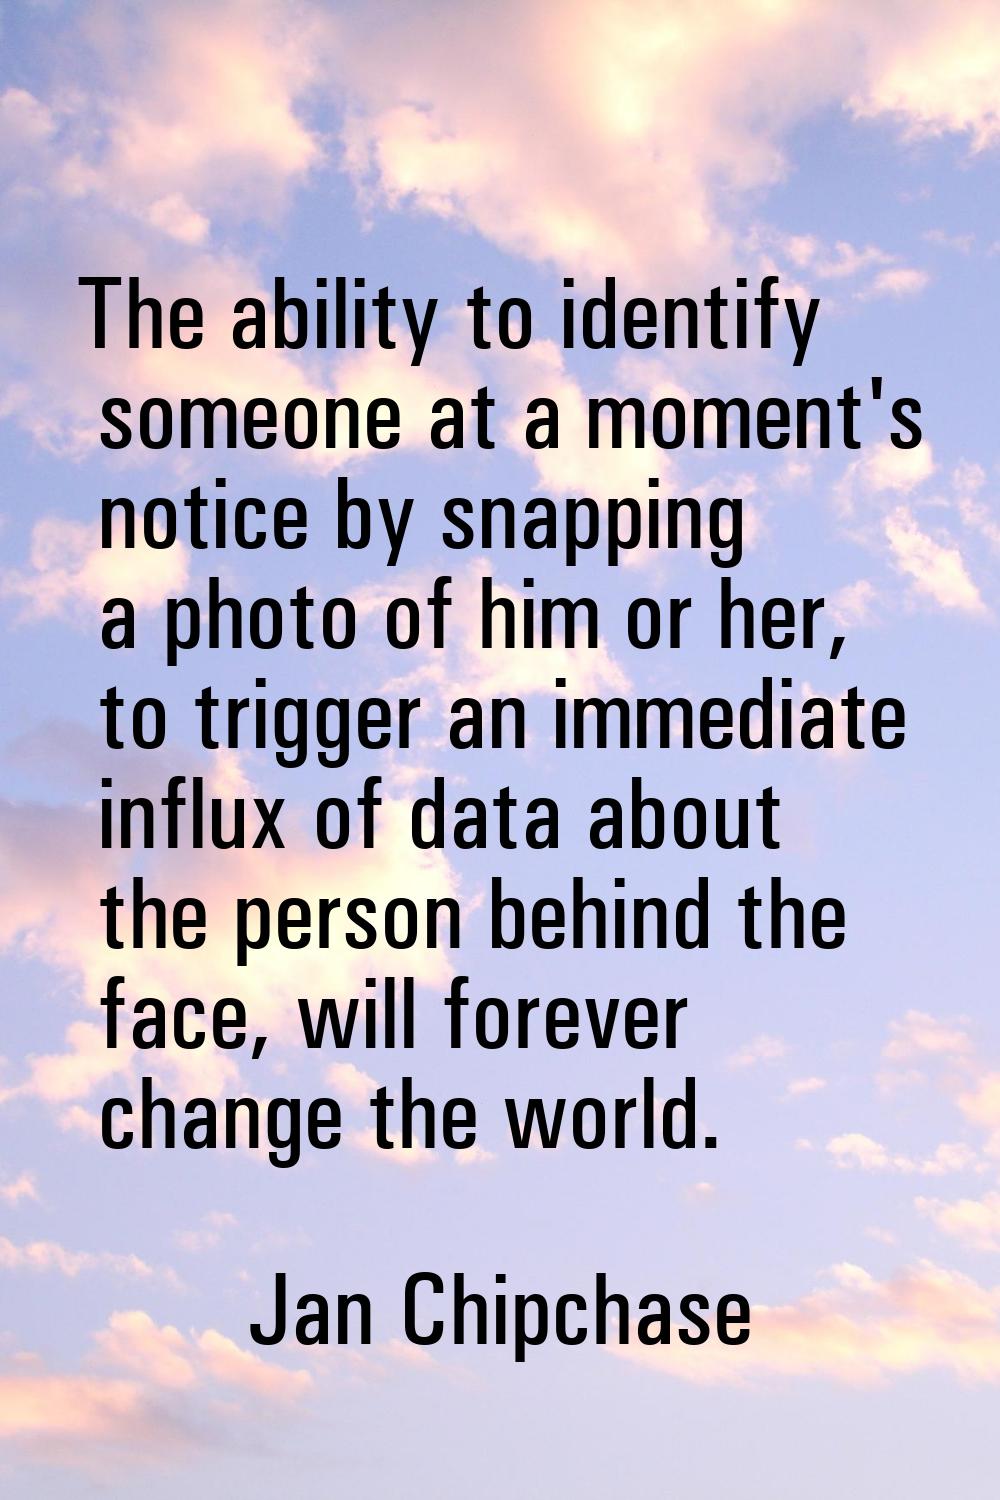 The ability to identify someone at a moment's notice by snapping a photo of him or her, to trigger 